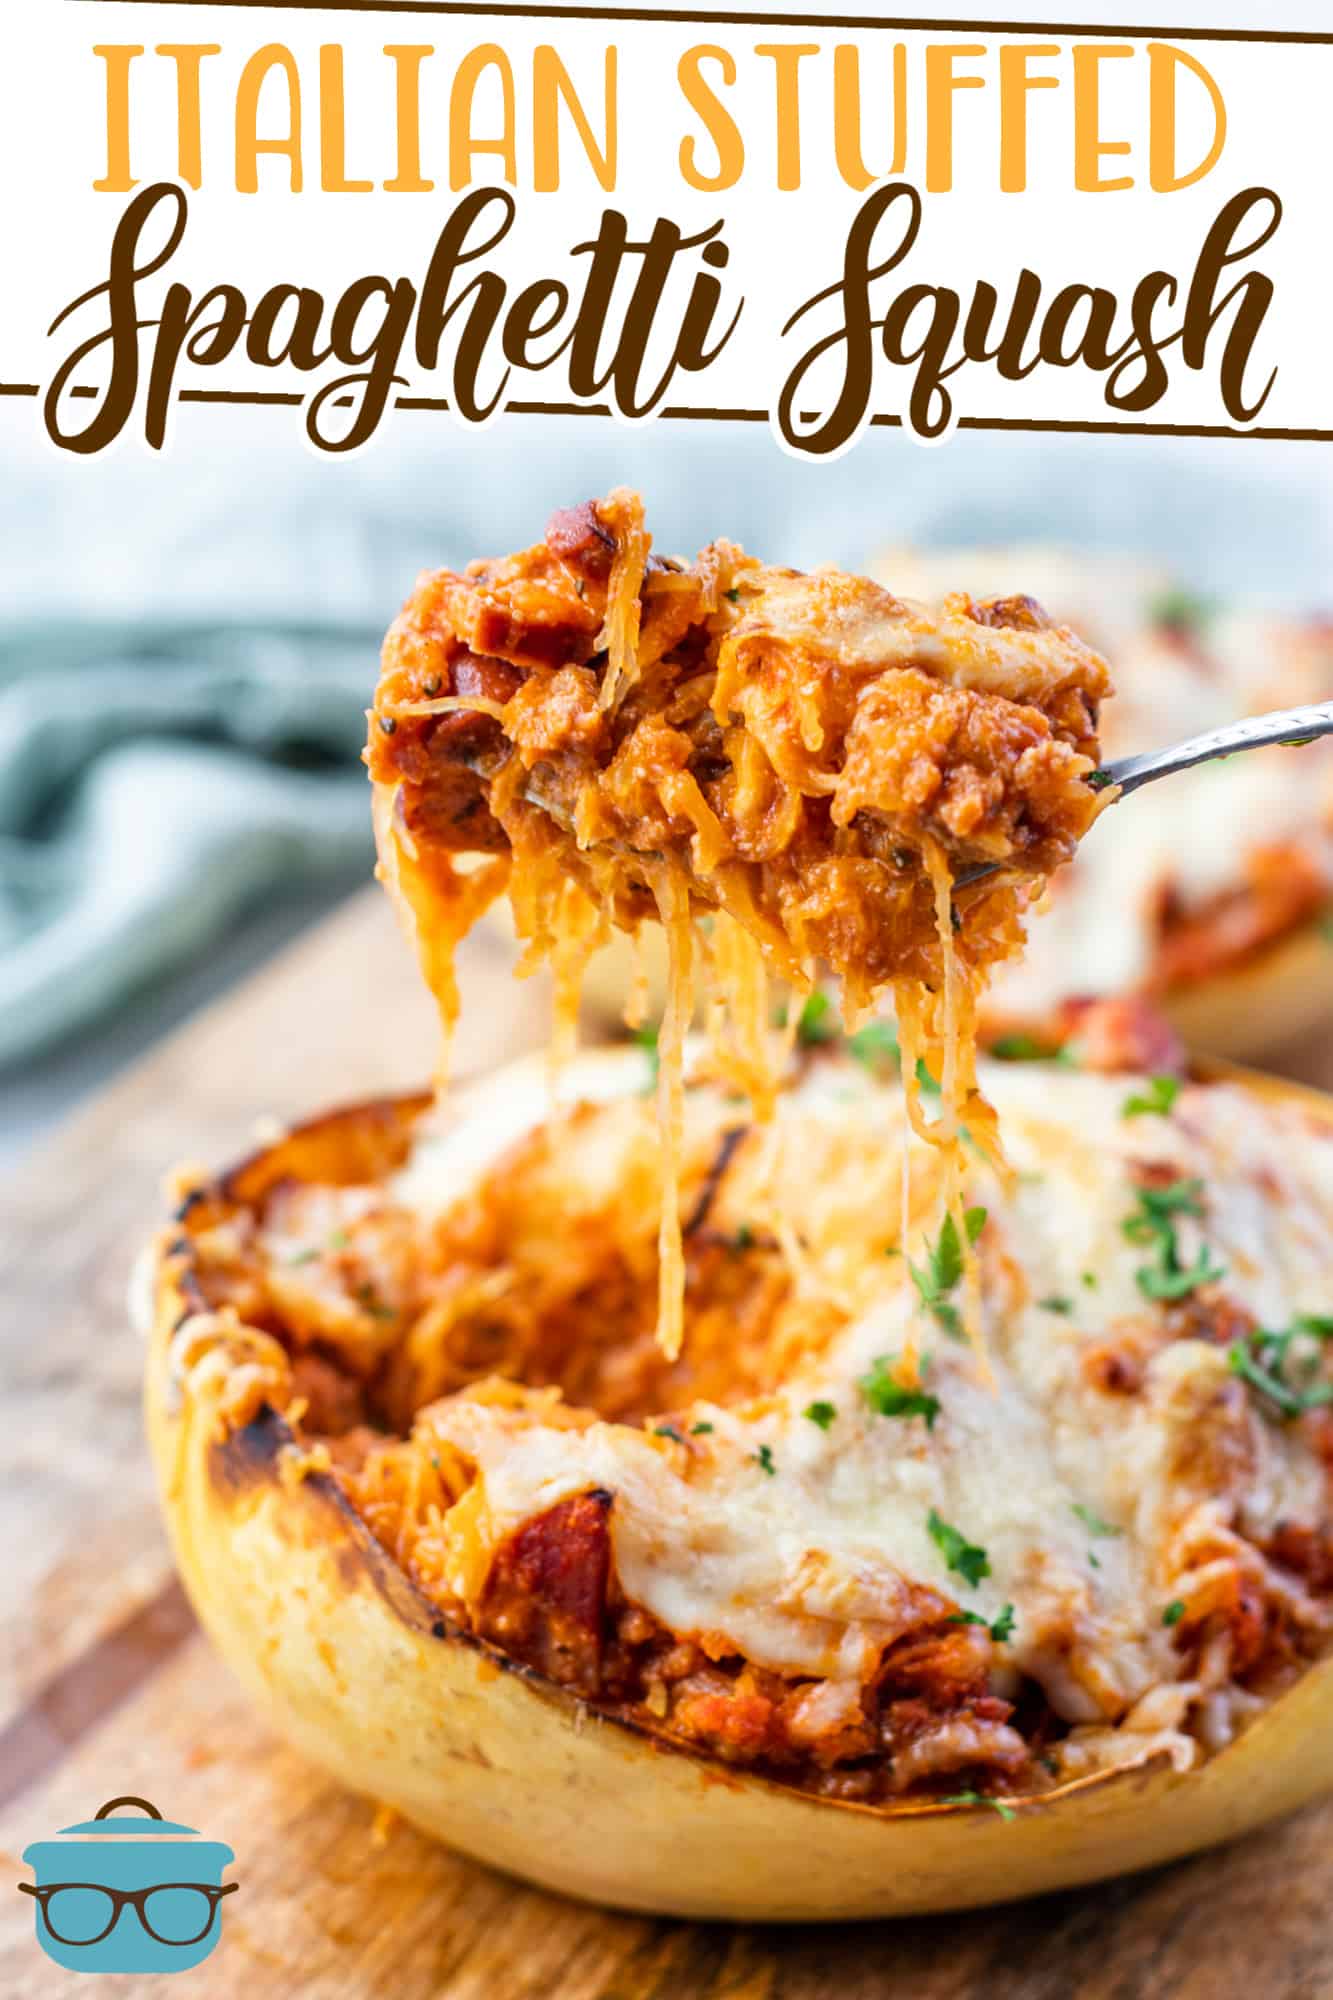 Italian Stuffed Spaghetti Squash recipe from The Country Cook, shown with a spoon scooping out some of the squash filling